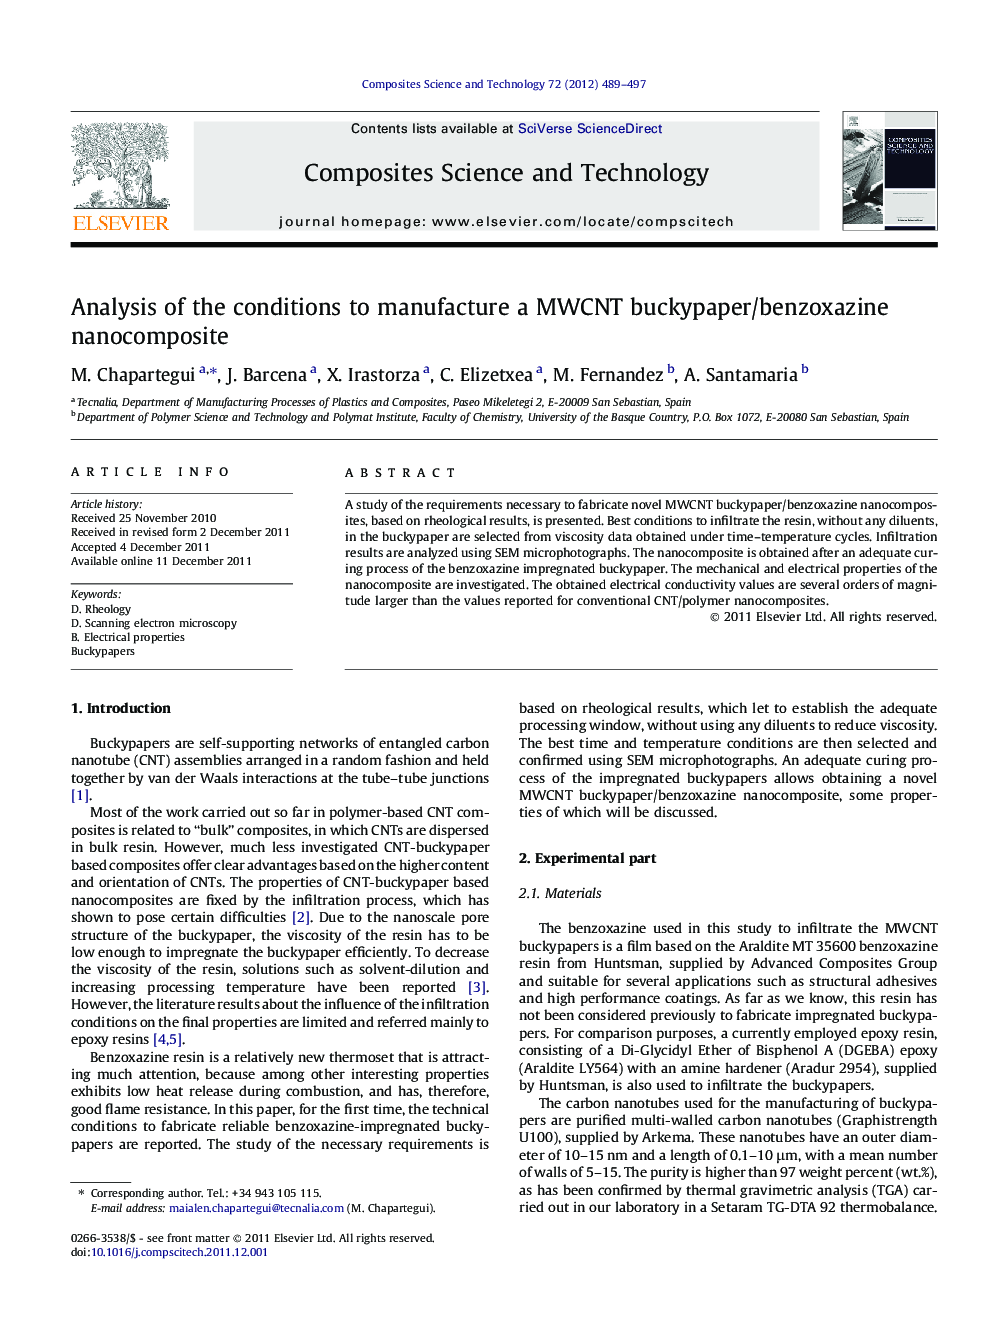 Analysis of the conditions to manufacture a MWCNT buckypaper/benzoxazine nanocomposite